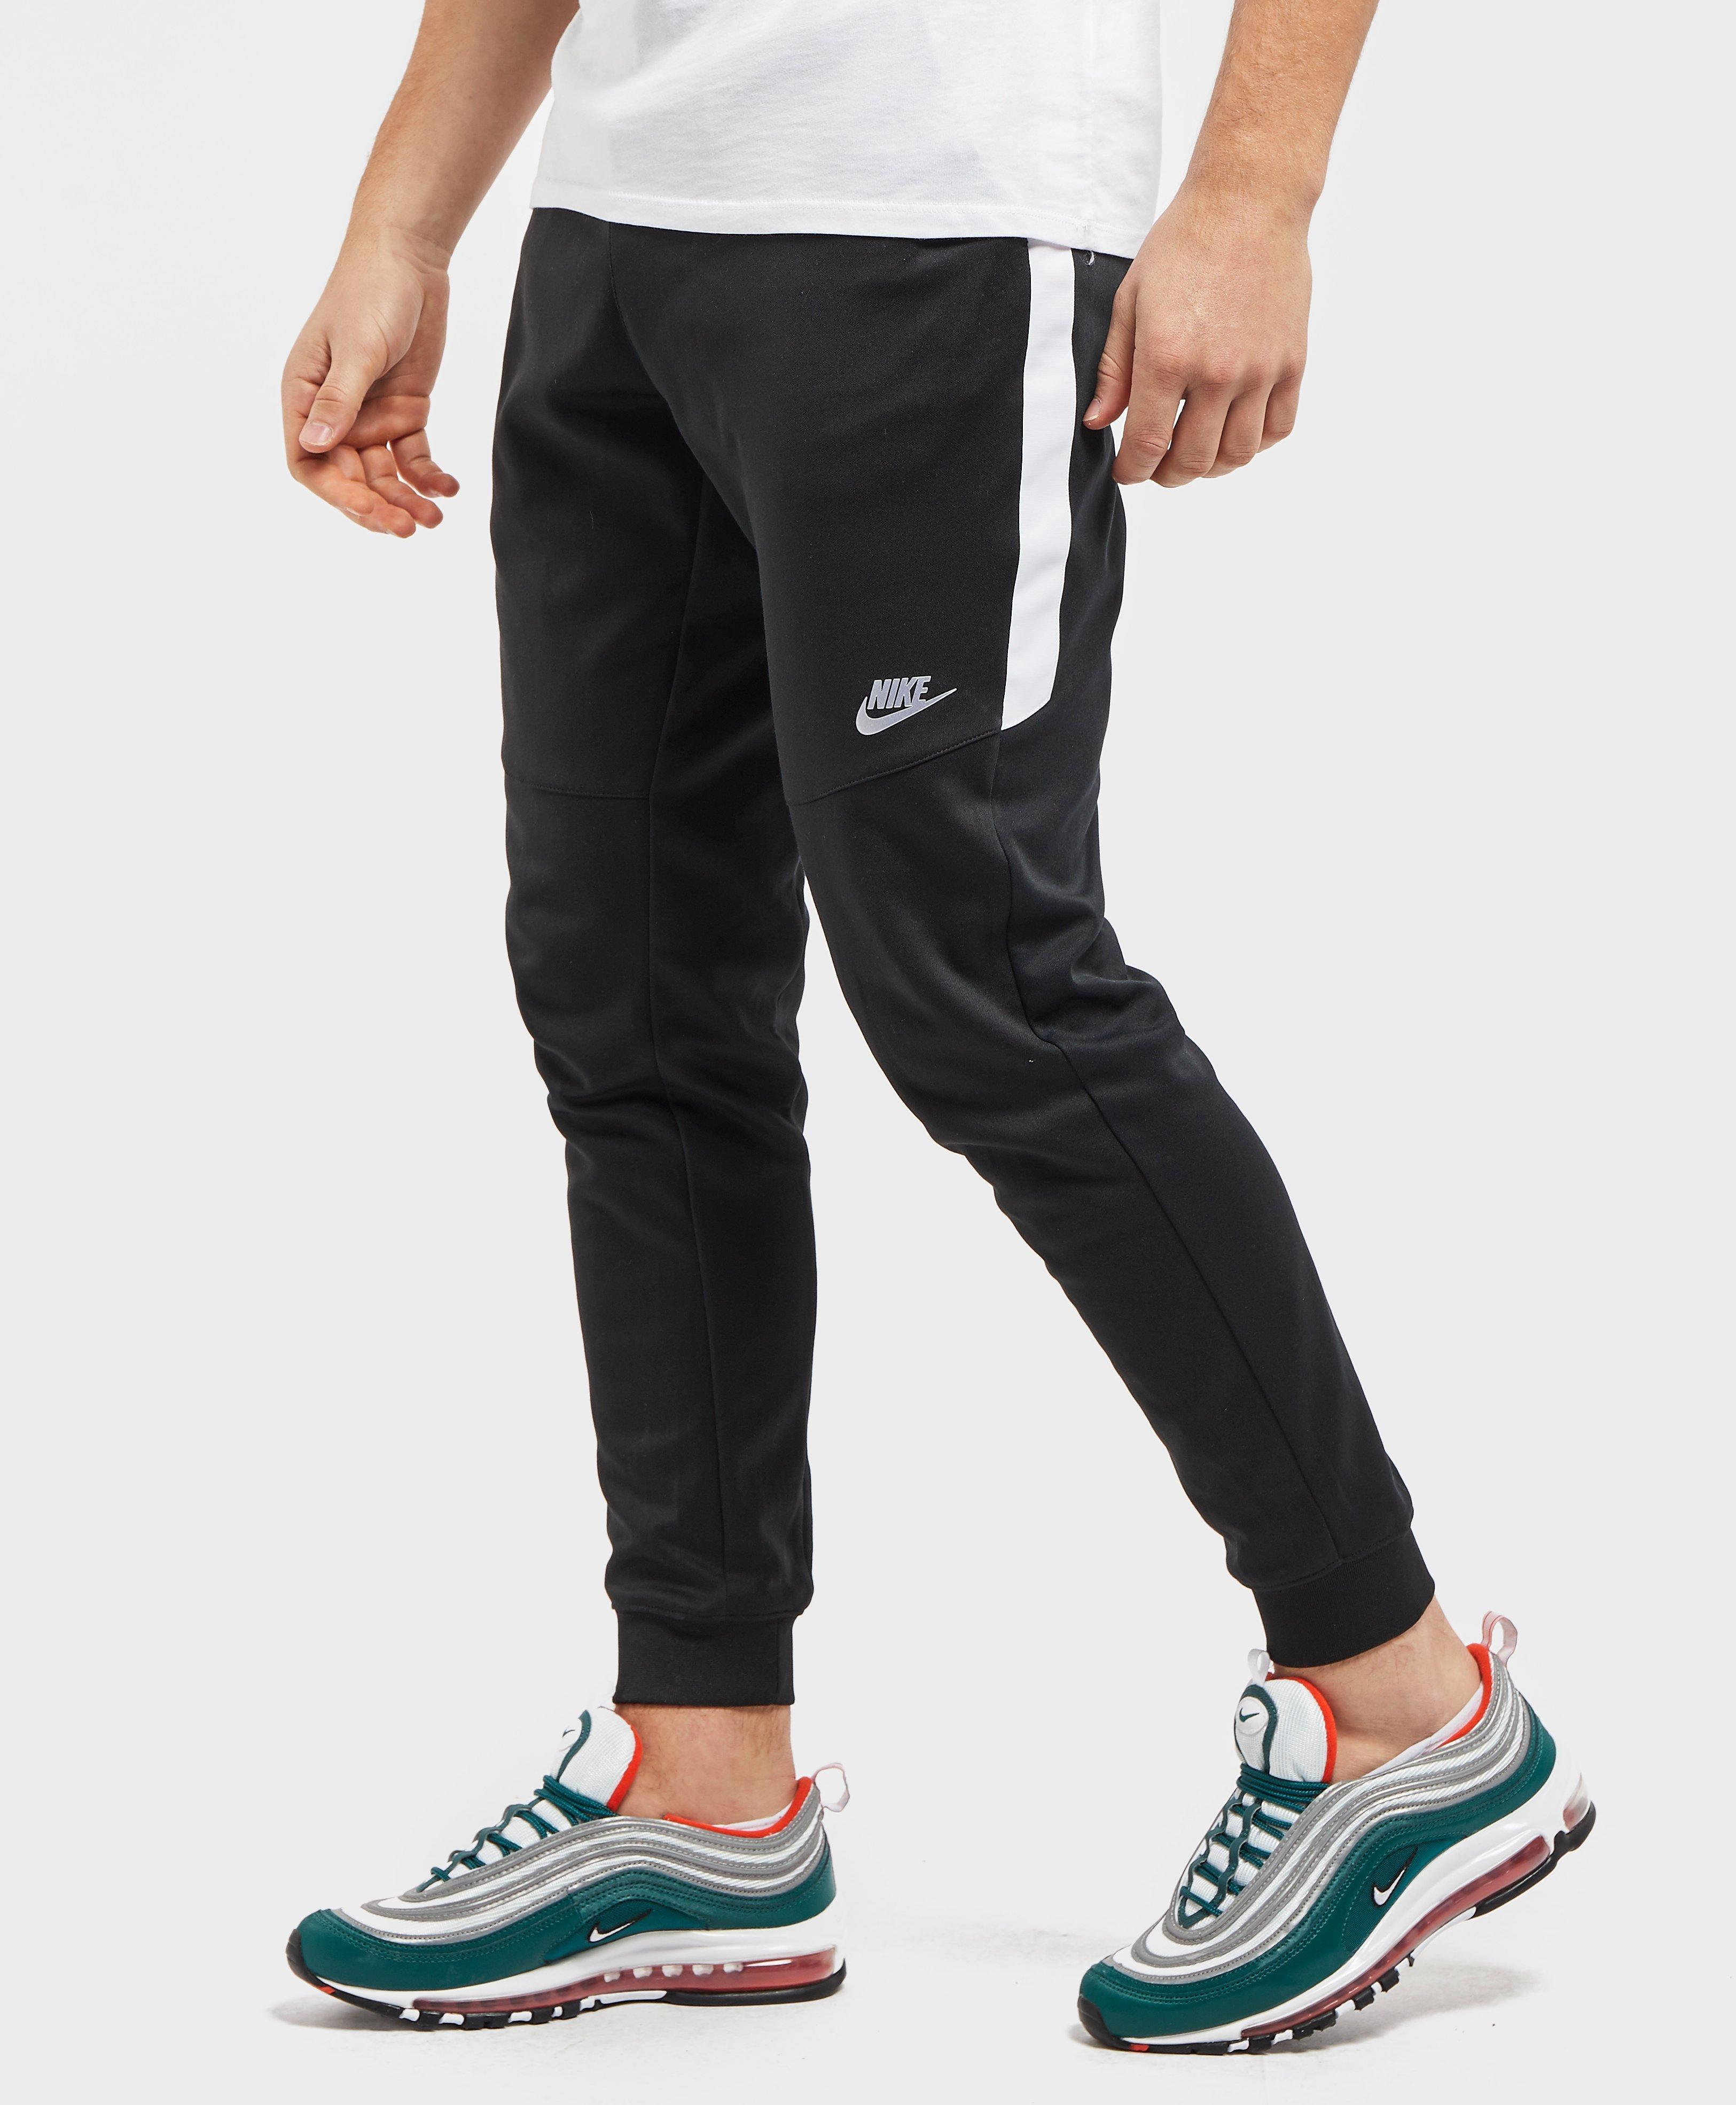 Nike Synthetic Tribute Dc Track Pants in Black for Men - Lyst